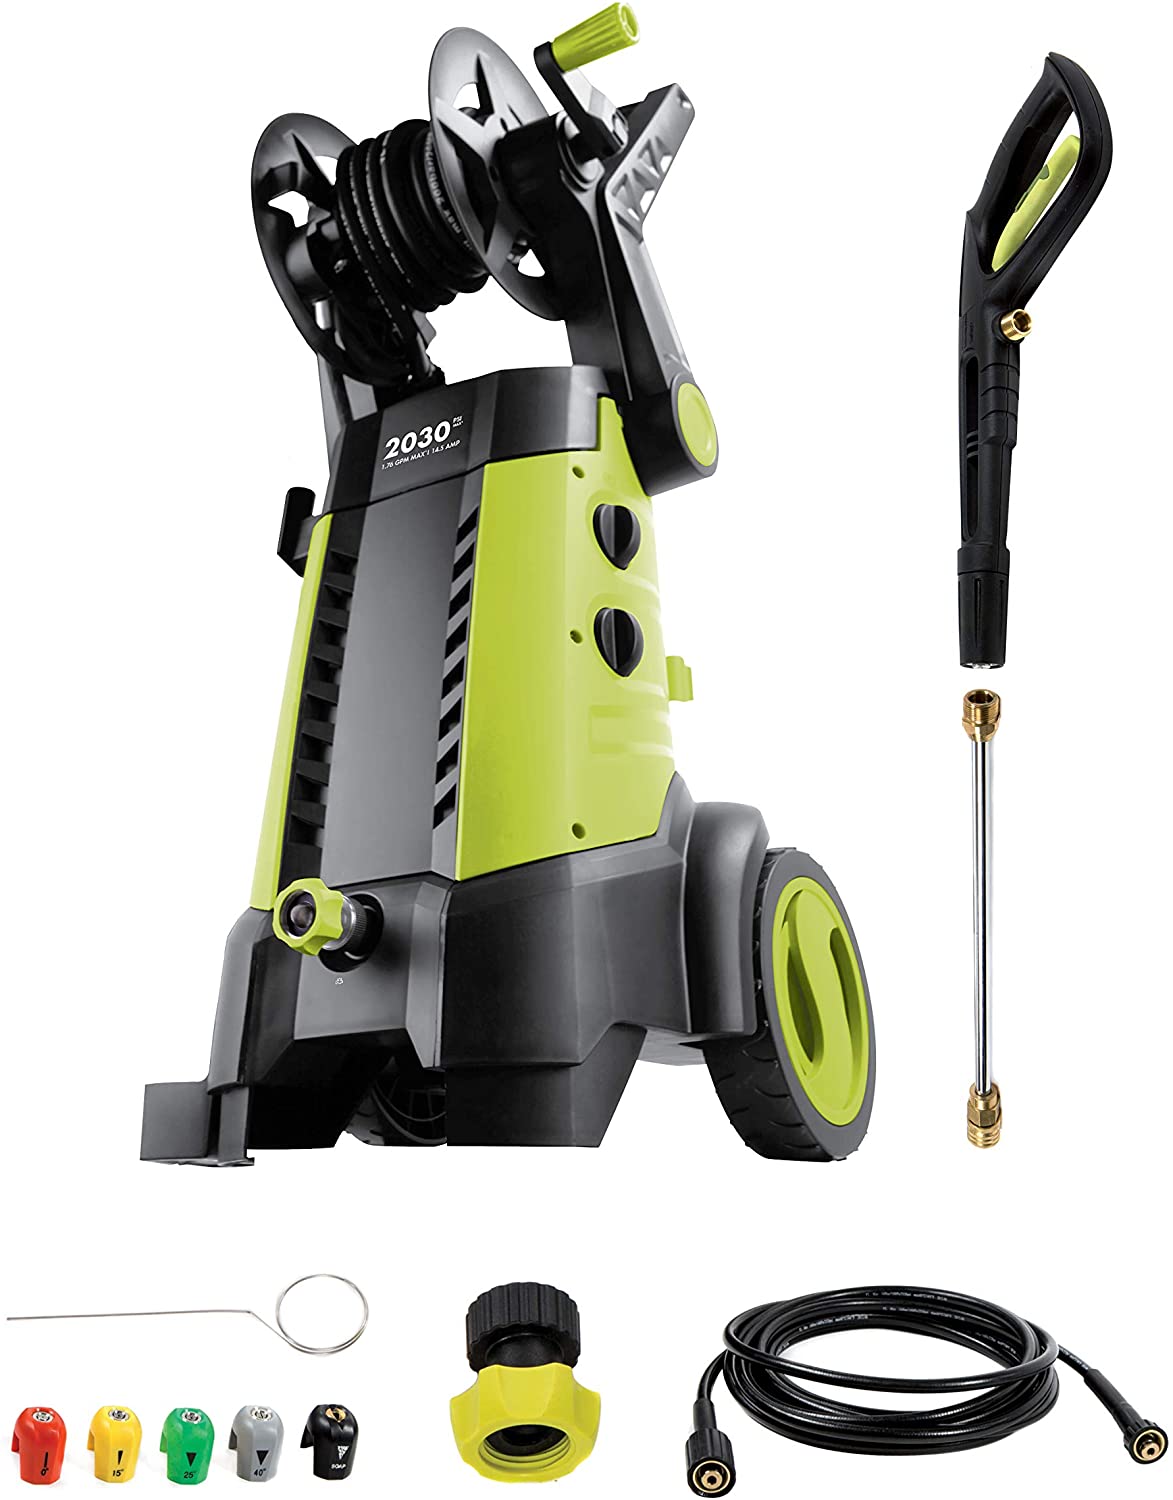 Sun Joe SSPX3001-XT1 Xtreme Product Image with Accessories